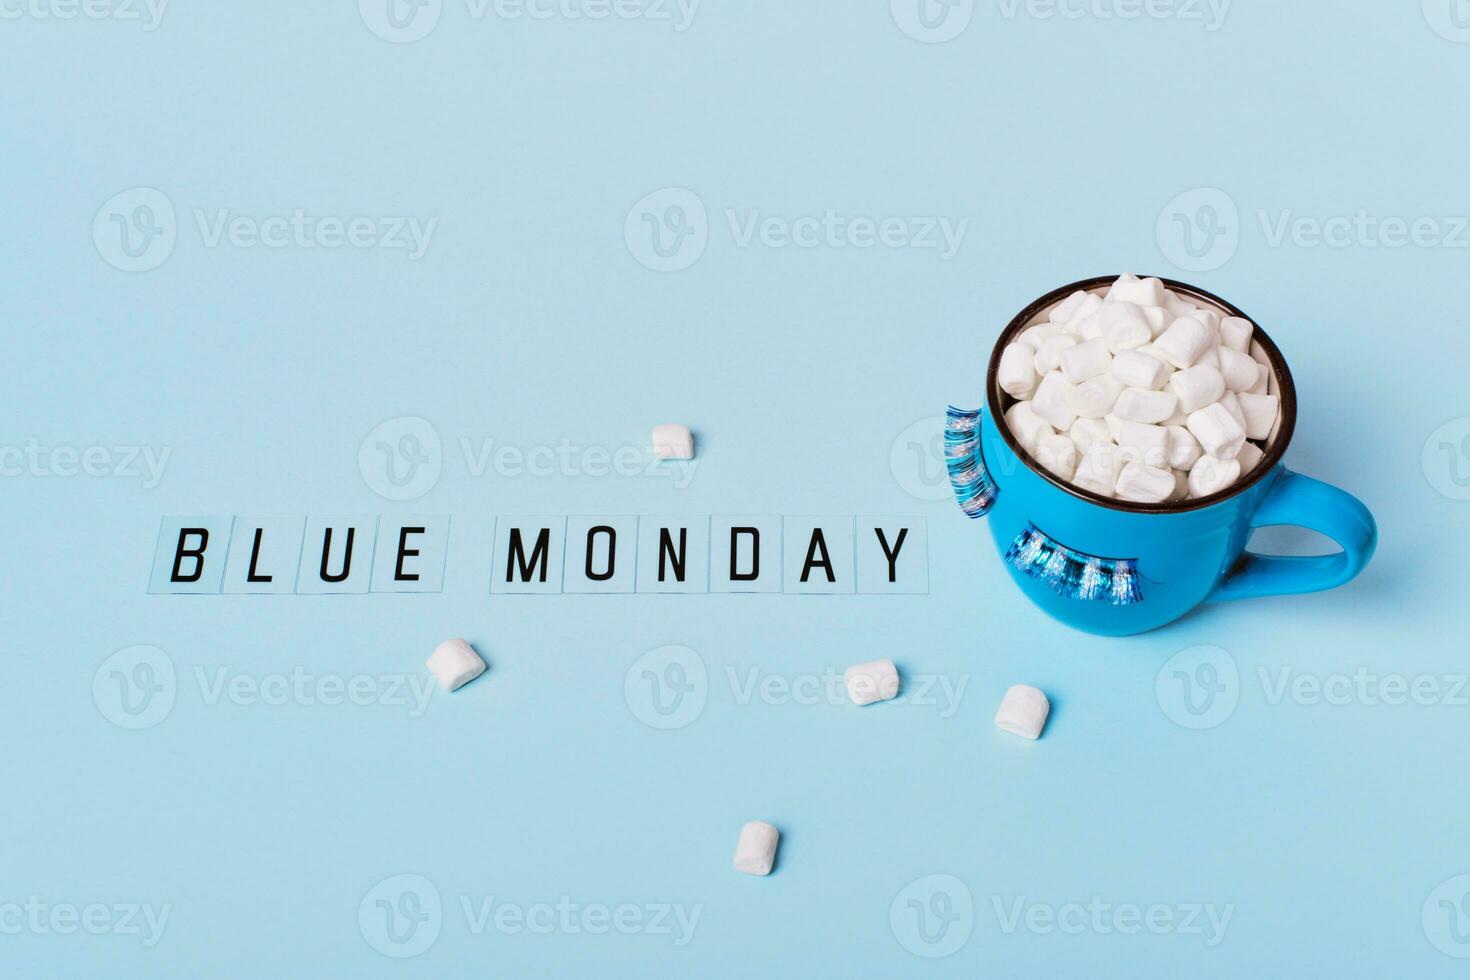 Blue monday concept. Blue monday text and mug of cocoa with marshmallows on blue background. Mug is decorated with eyelashes down photo